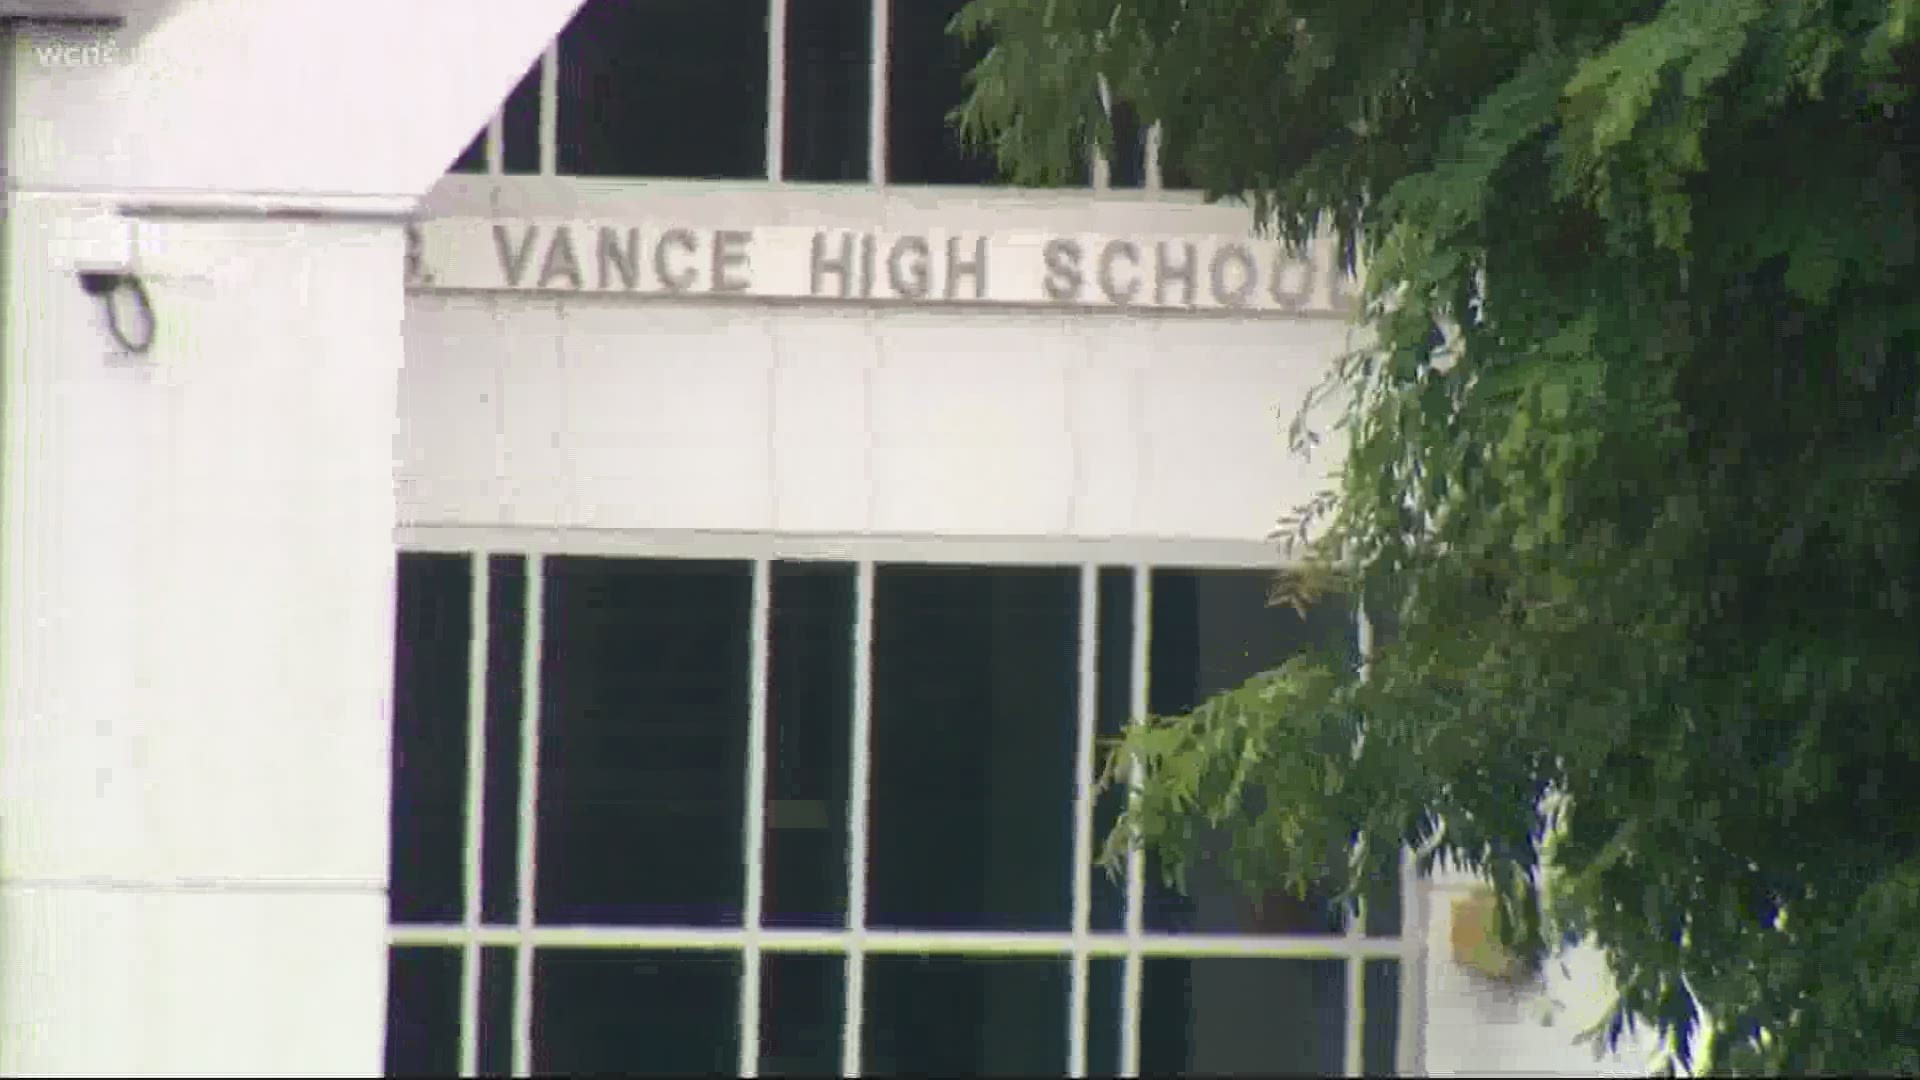 Salisbury has voted to move the Fame statue as CMS is considering changing the name of Vance High School.